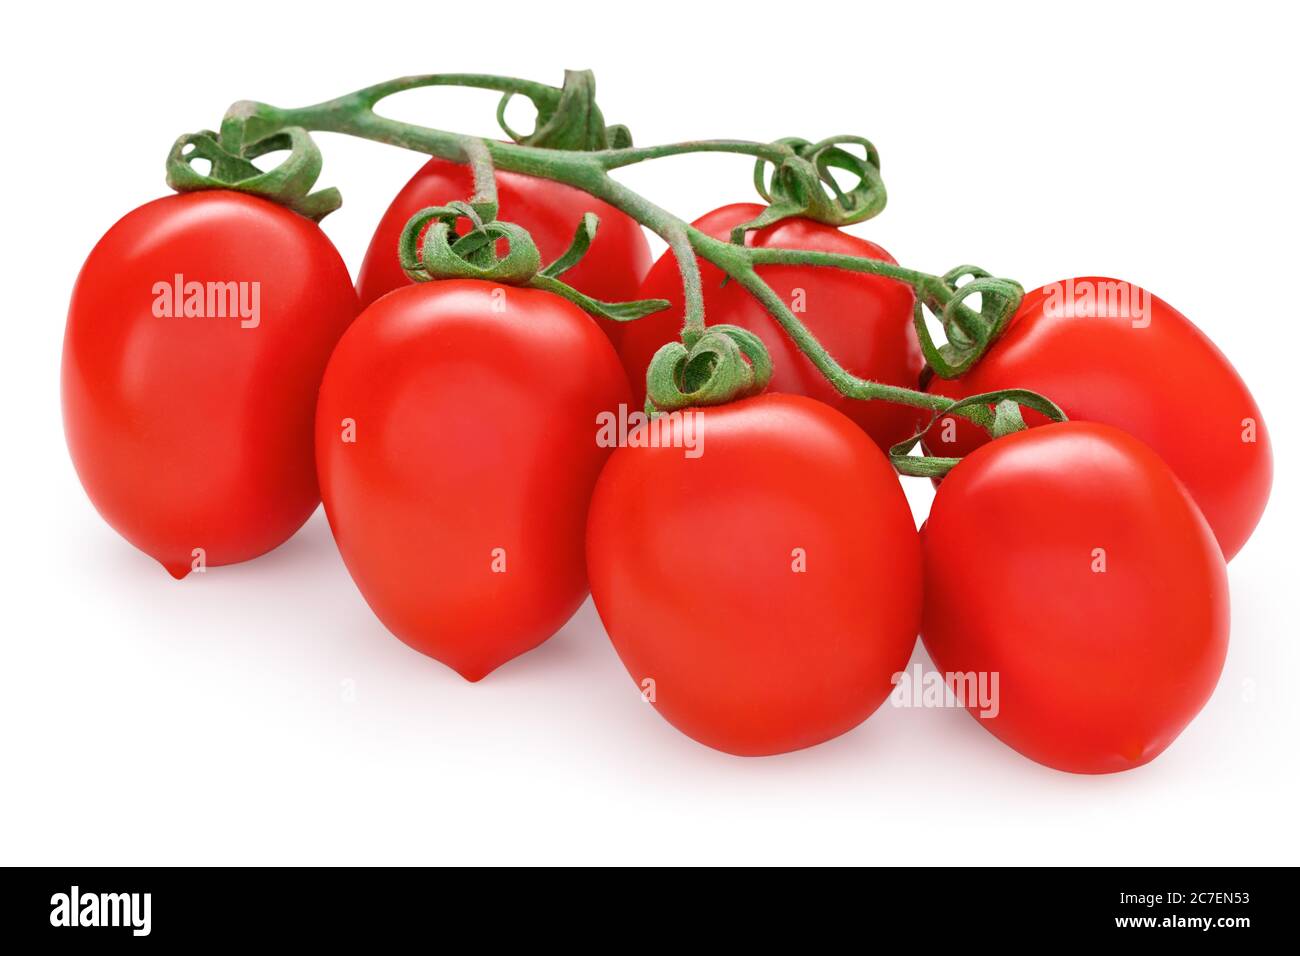 Bunch of red roma vf tomatoes. Solanum lycopersicum. Fresh plum tomato cluster. Vegetable isolated on white background. Stock Photo